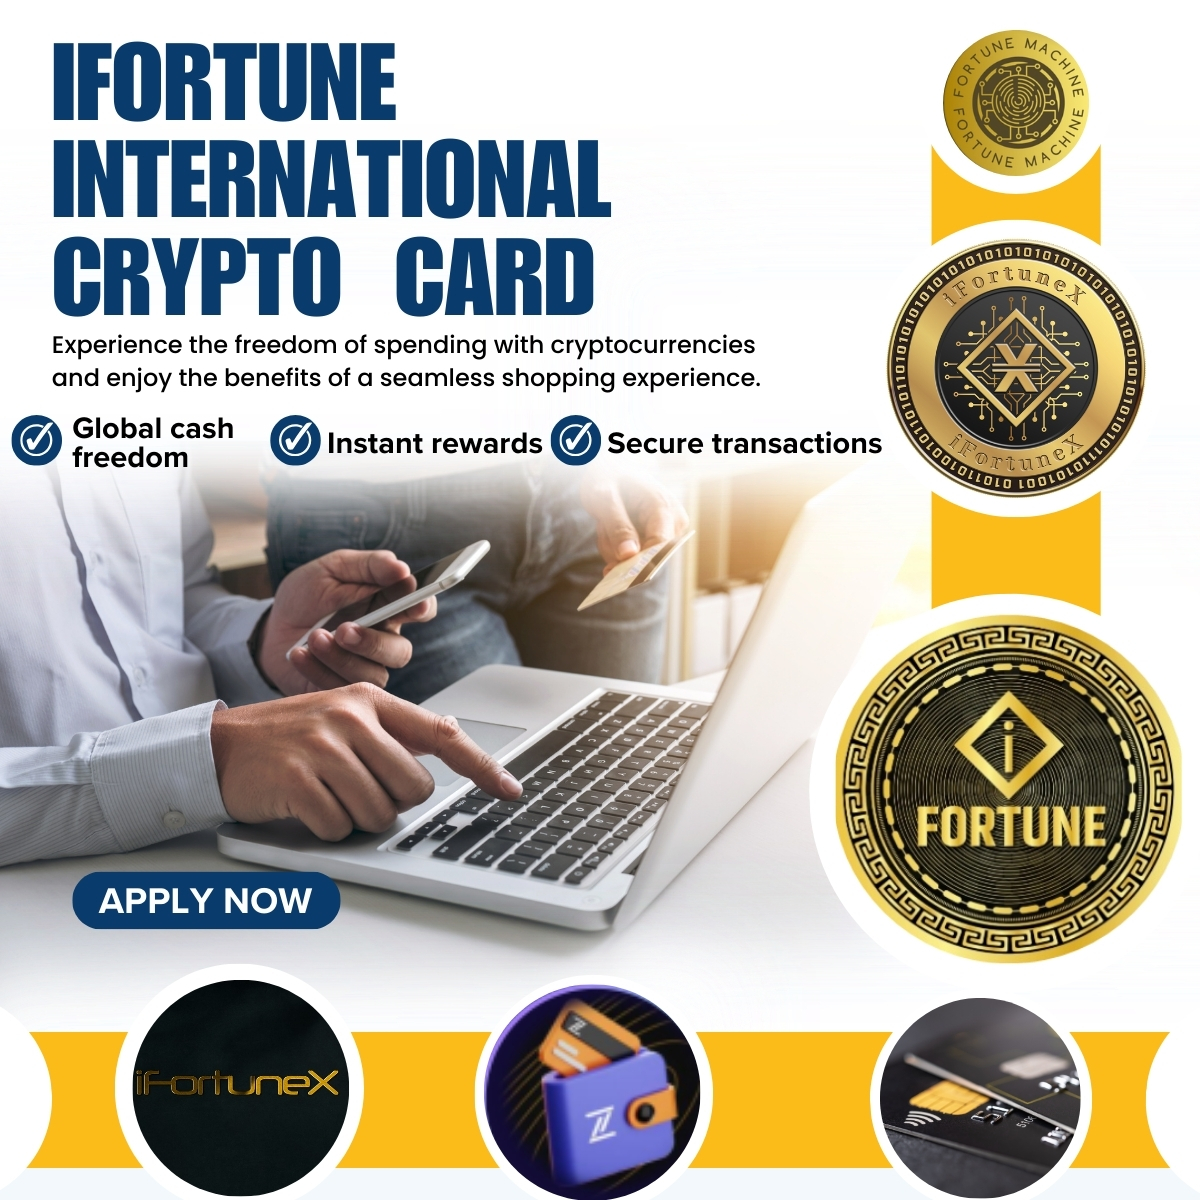 Go Global with IFC Card: ATM Access, Secure Shopping, Endless Possibilities!
#FizenWallet #IFCPower #SimpleTransactions
#FortuneMachineApp #WealthJourney #DailyPower #iFortuneApp
#IFCCryptoCard #SecureShopping #MultiCurrencyFreedom
#cryptocoinexchange #cryptocoinscommunity